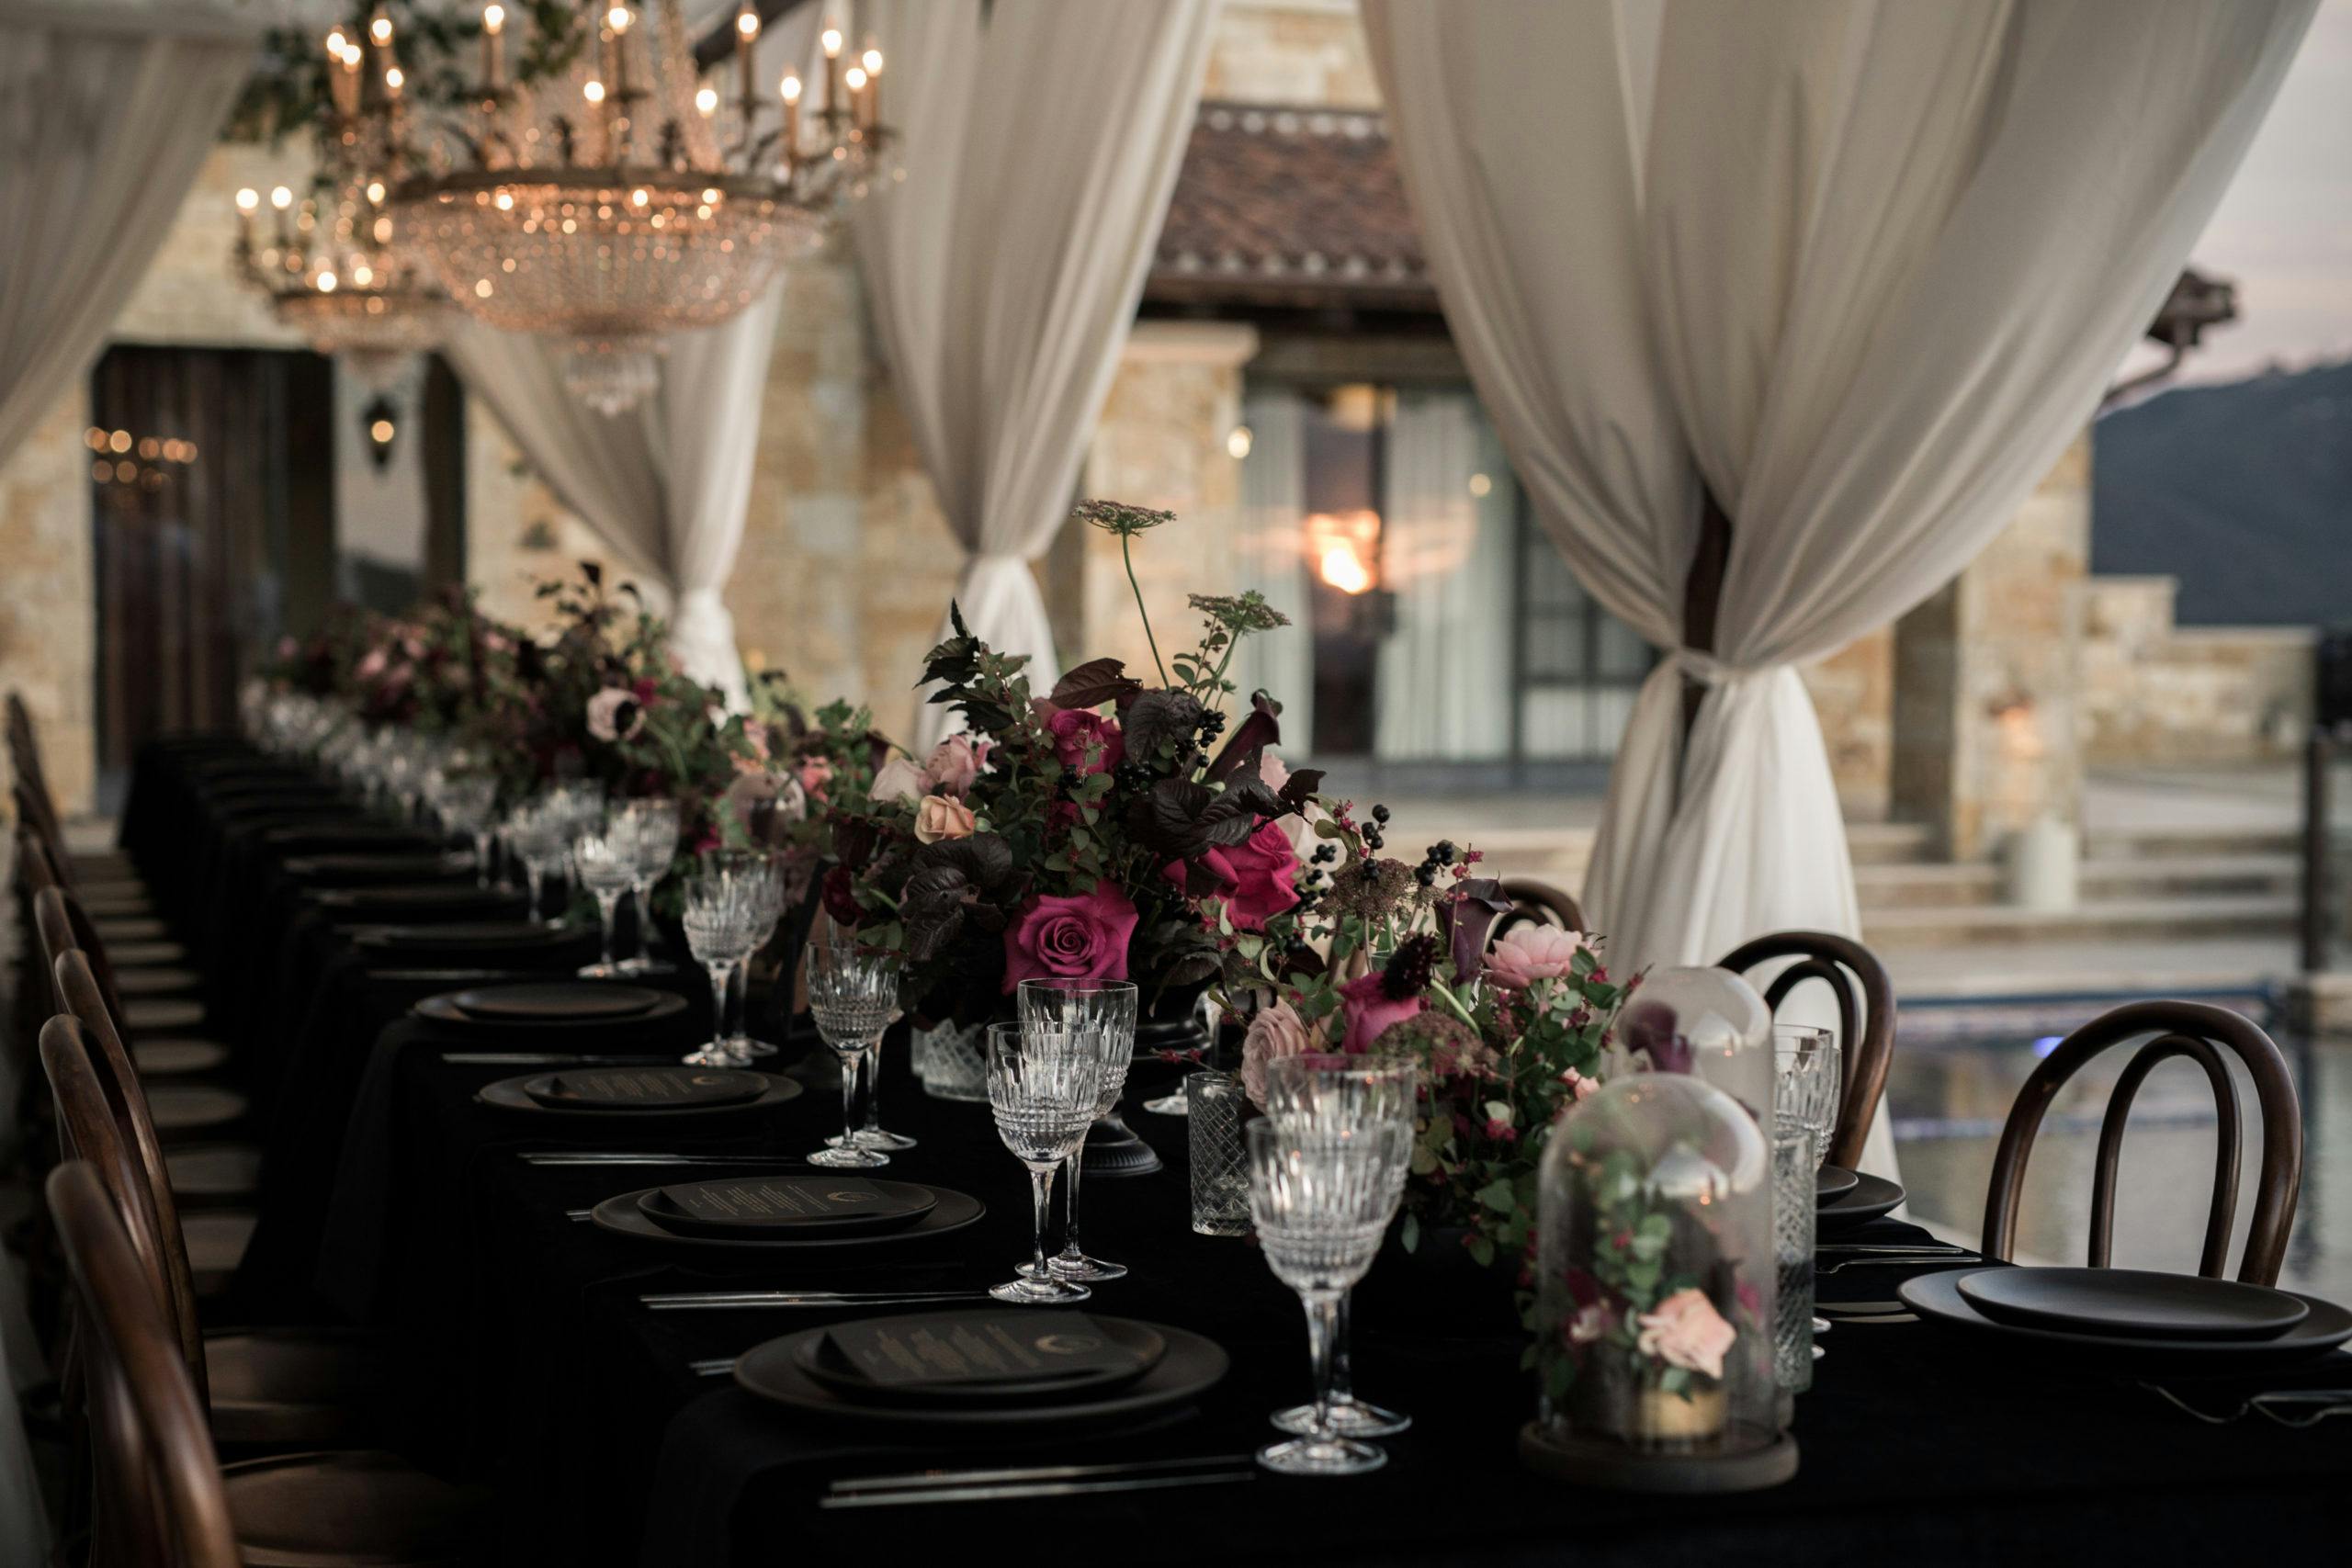 An all black table setting with dark-hued floral centerpieces at an autumn wedding | PartySlate